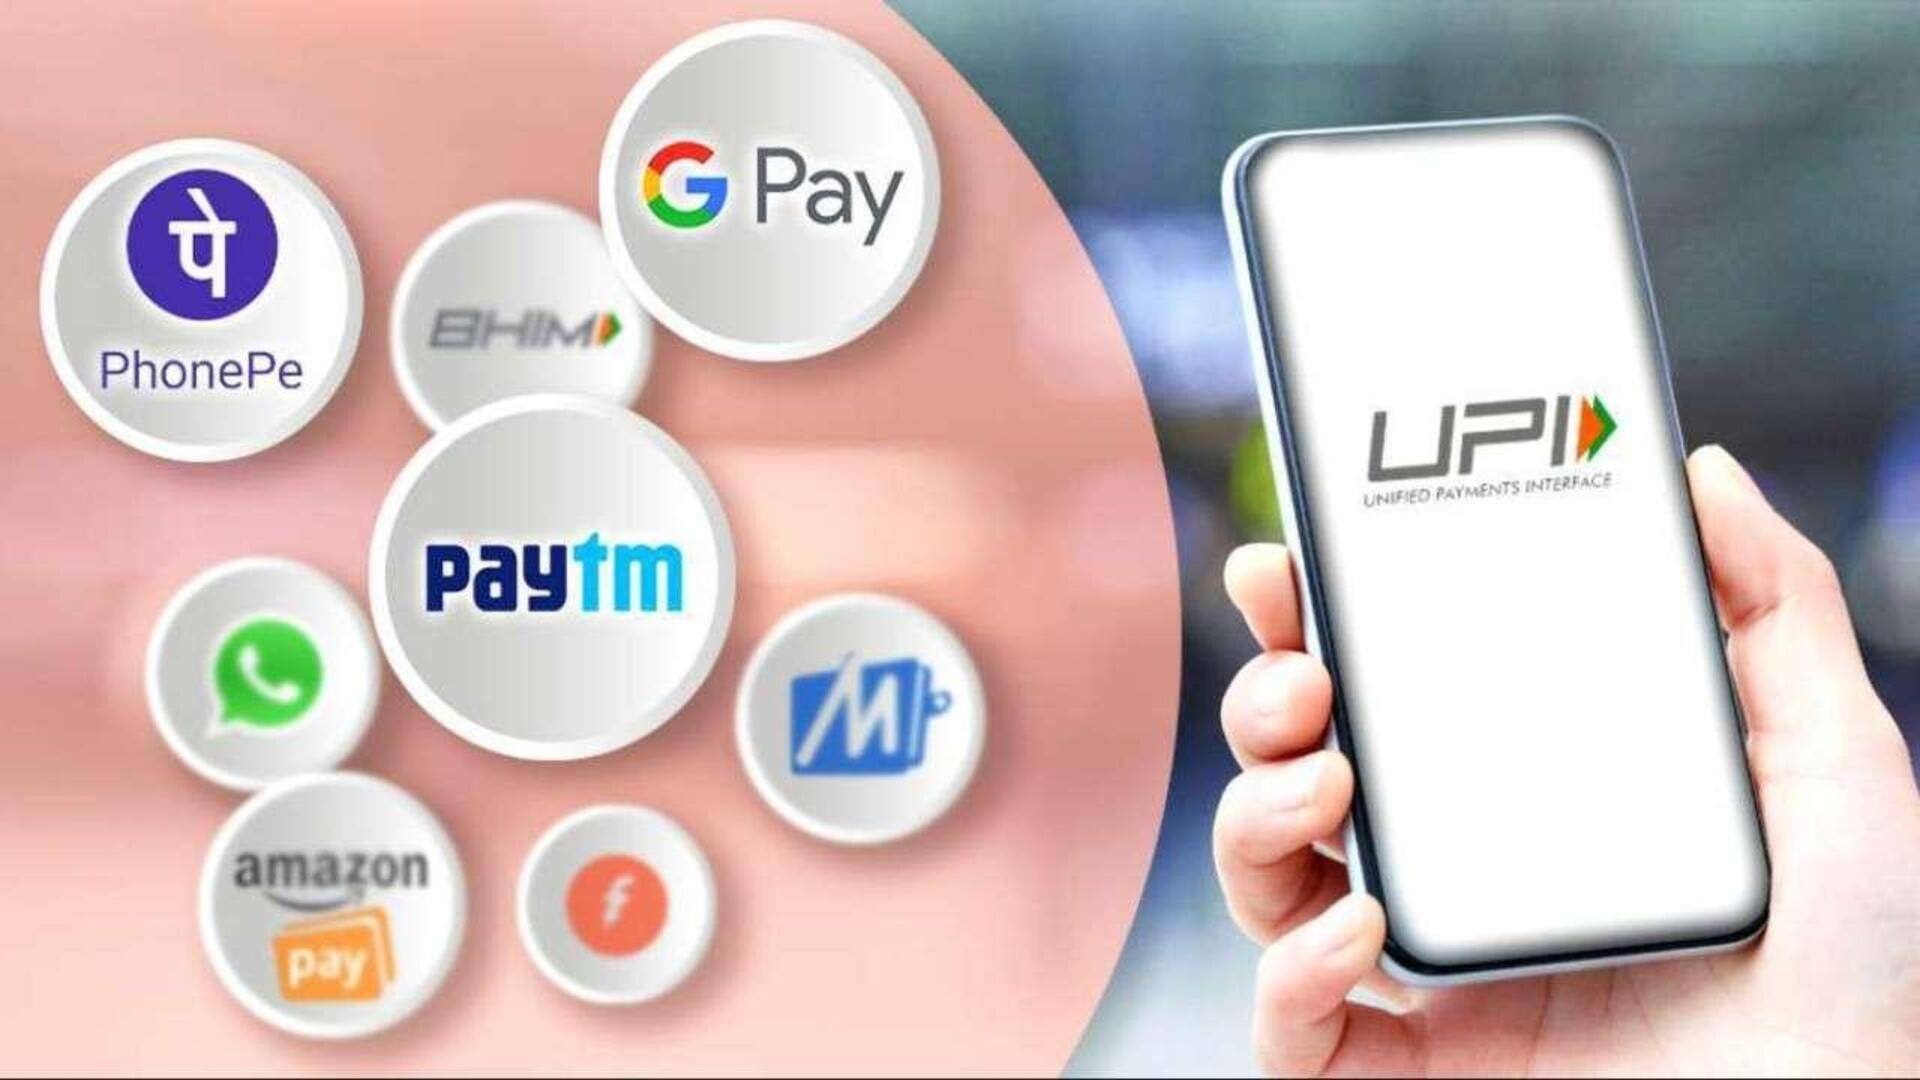 Cross-platform transactions for UPI wallets: What RBI's new rules entail